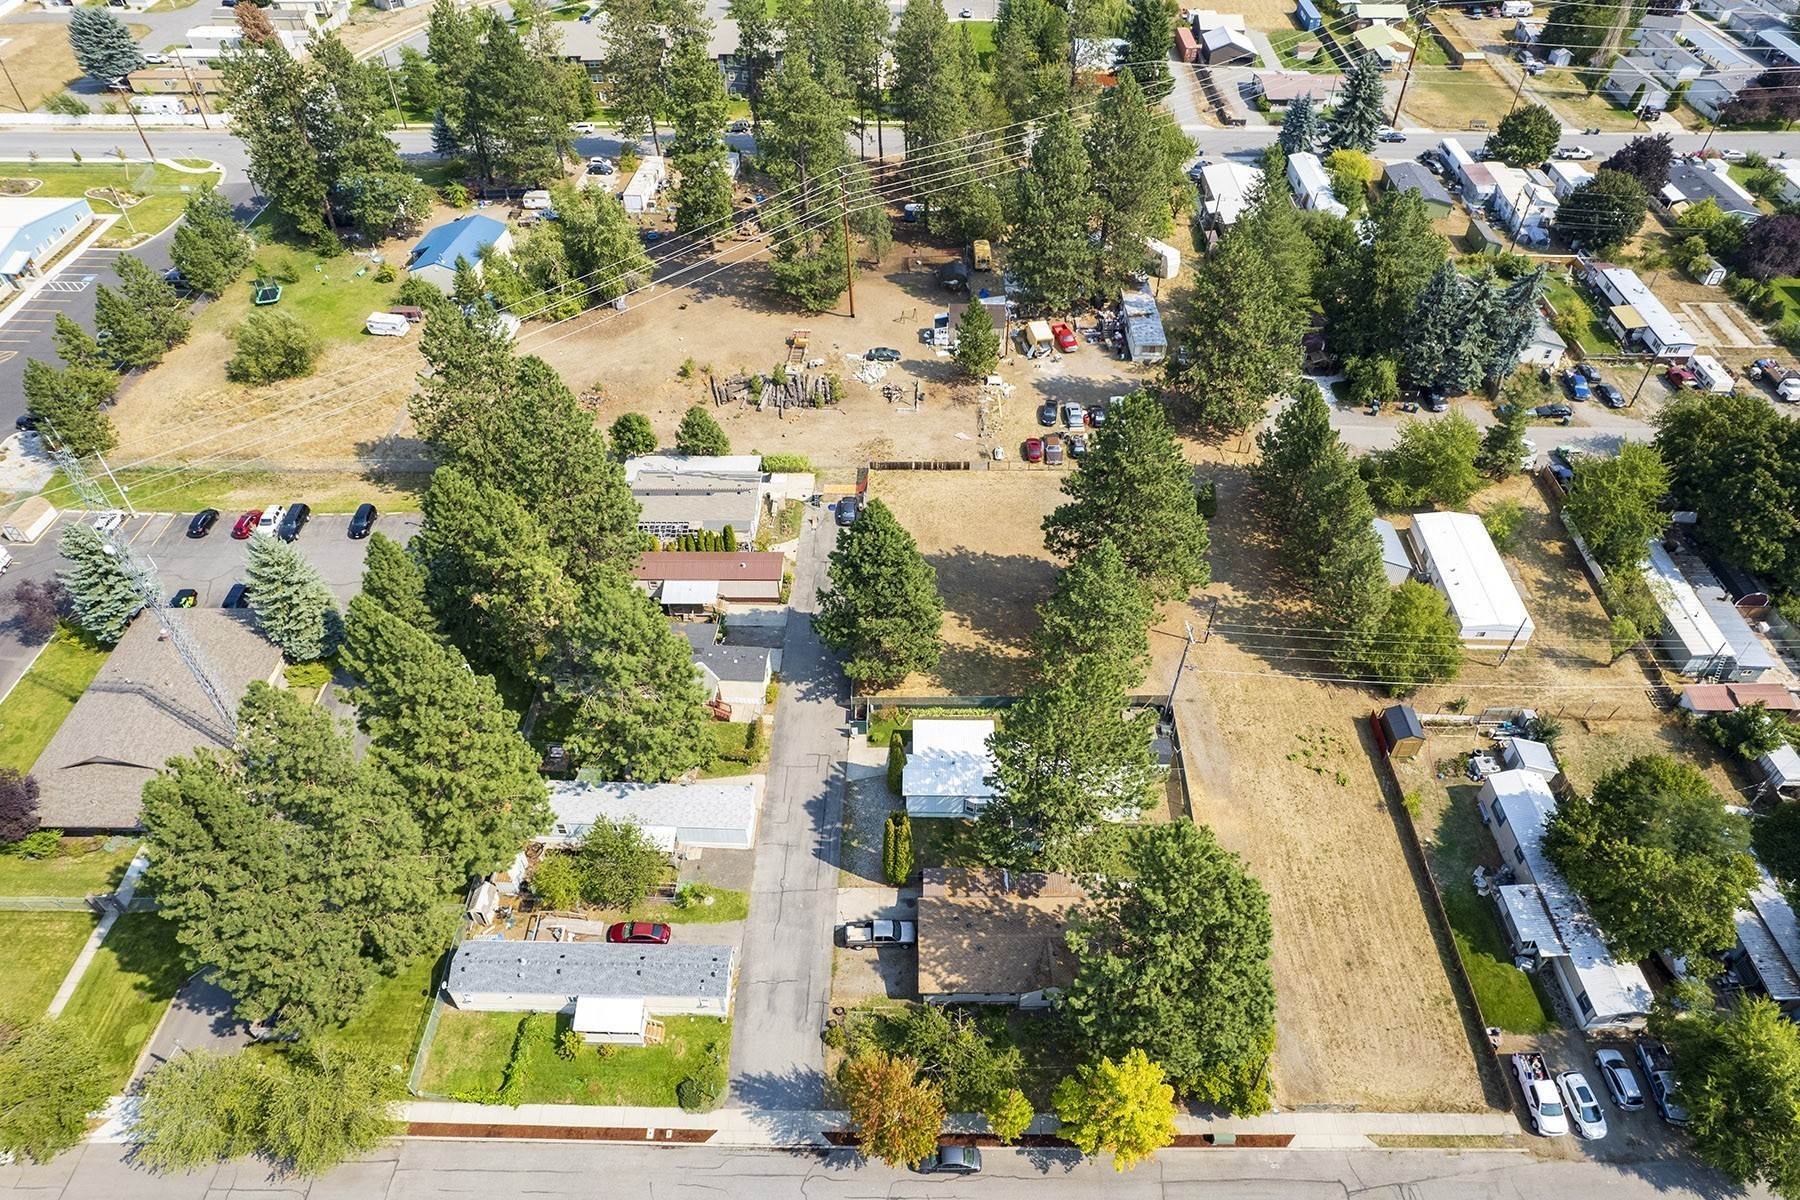 Land for Sale at Mid Town Vacant Lot 3102 N Francis St Coeur d’Alene, Idaho 83815 United States